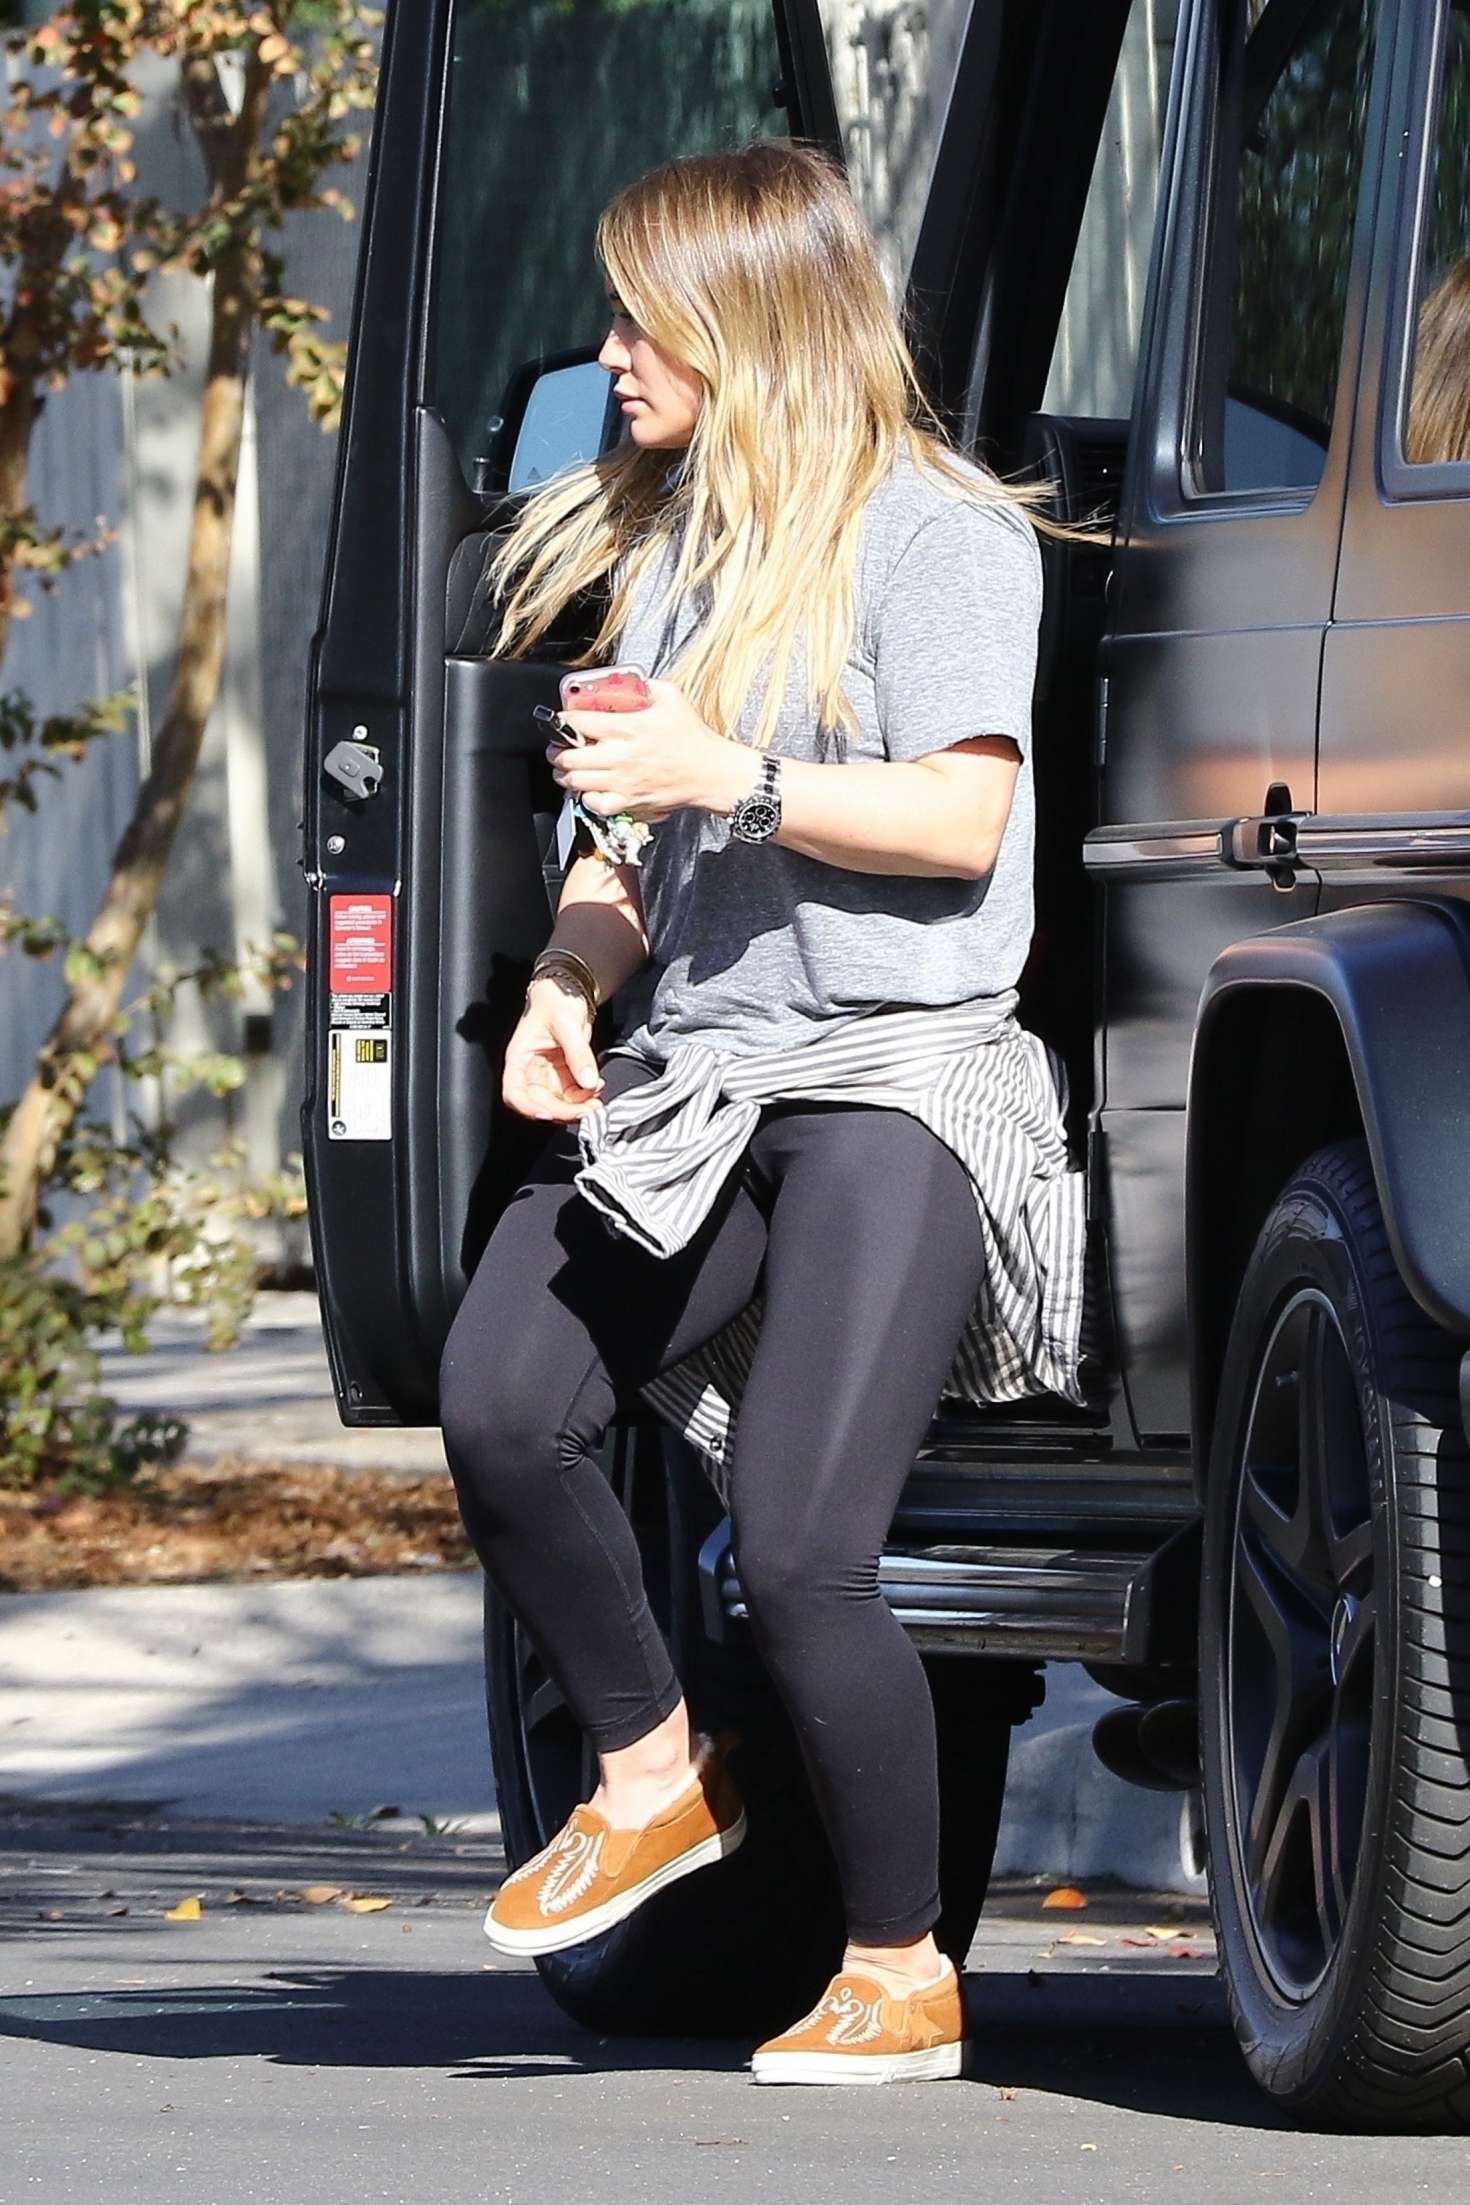 Hilary Duff in Spandex – After workout in Los Angeles – GotCeleb